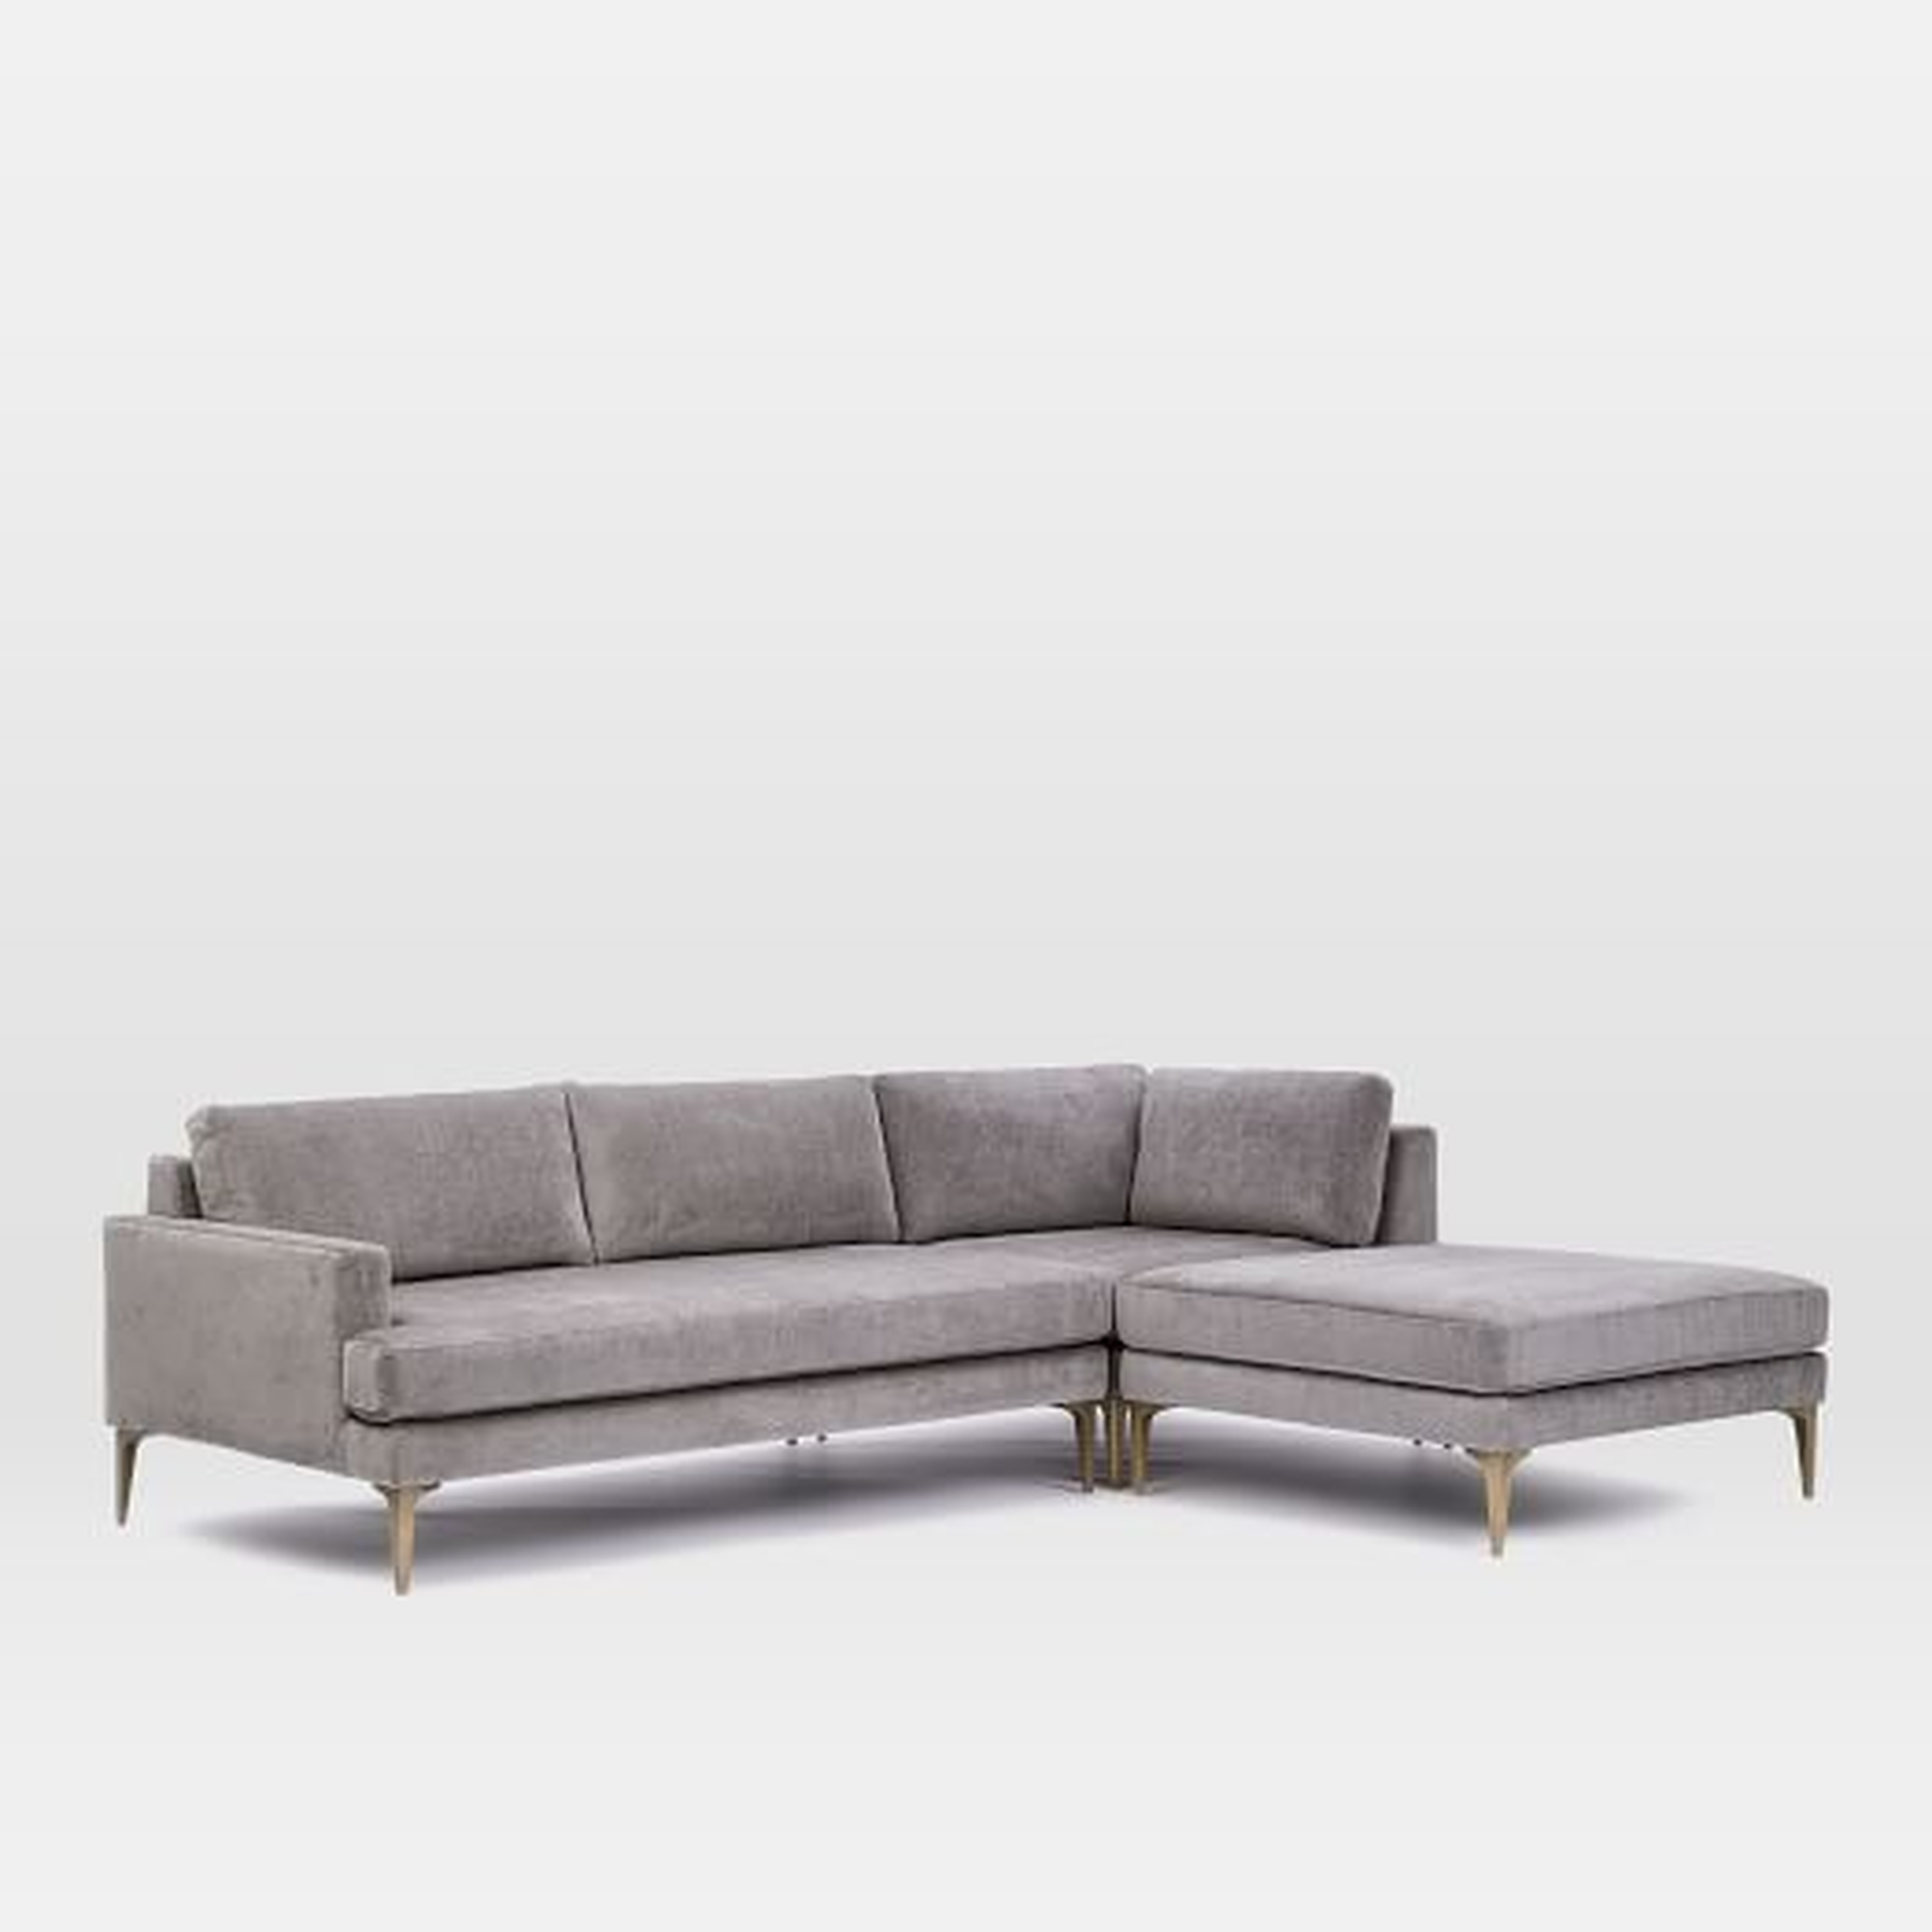 Andes 3-Piece Chaise Sectional - West Elm